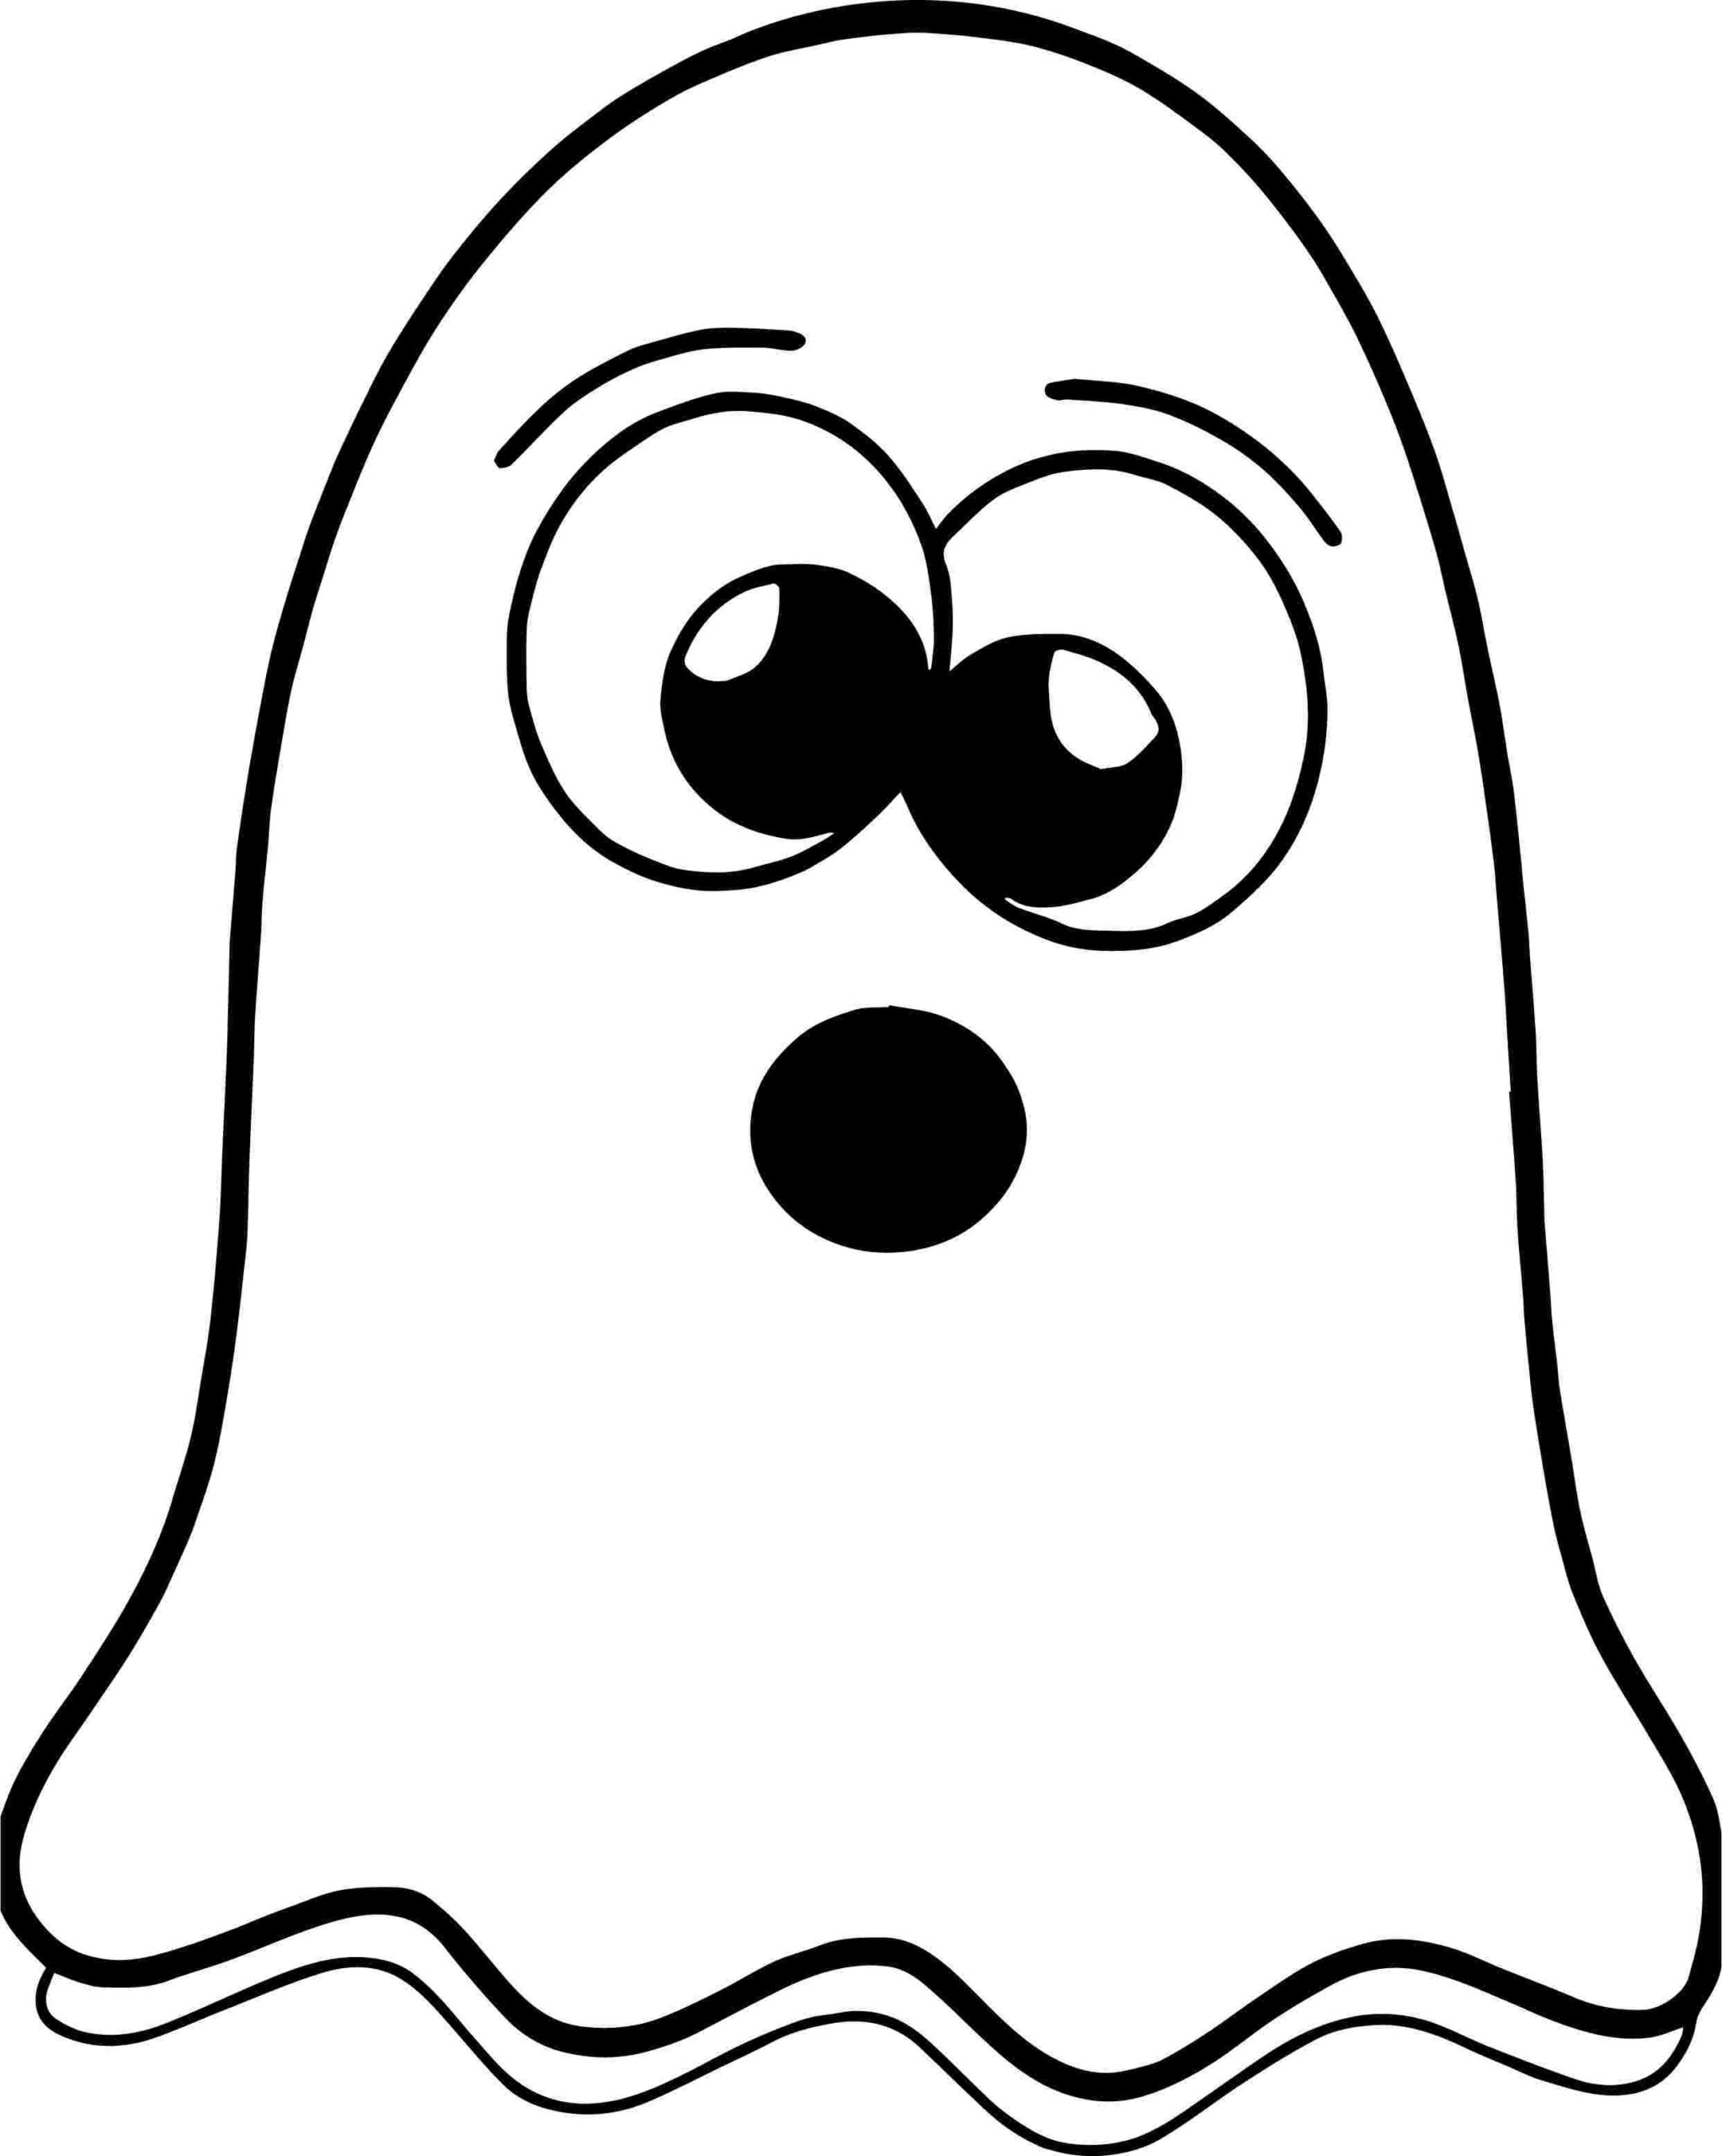 Coloring Pages : Cute Ghost Coloring Free Printable Printables For ...